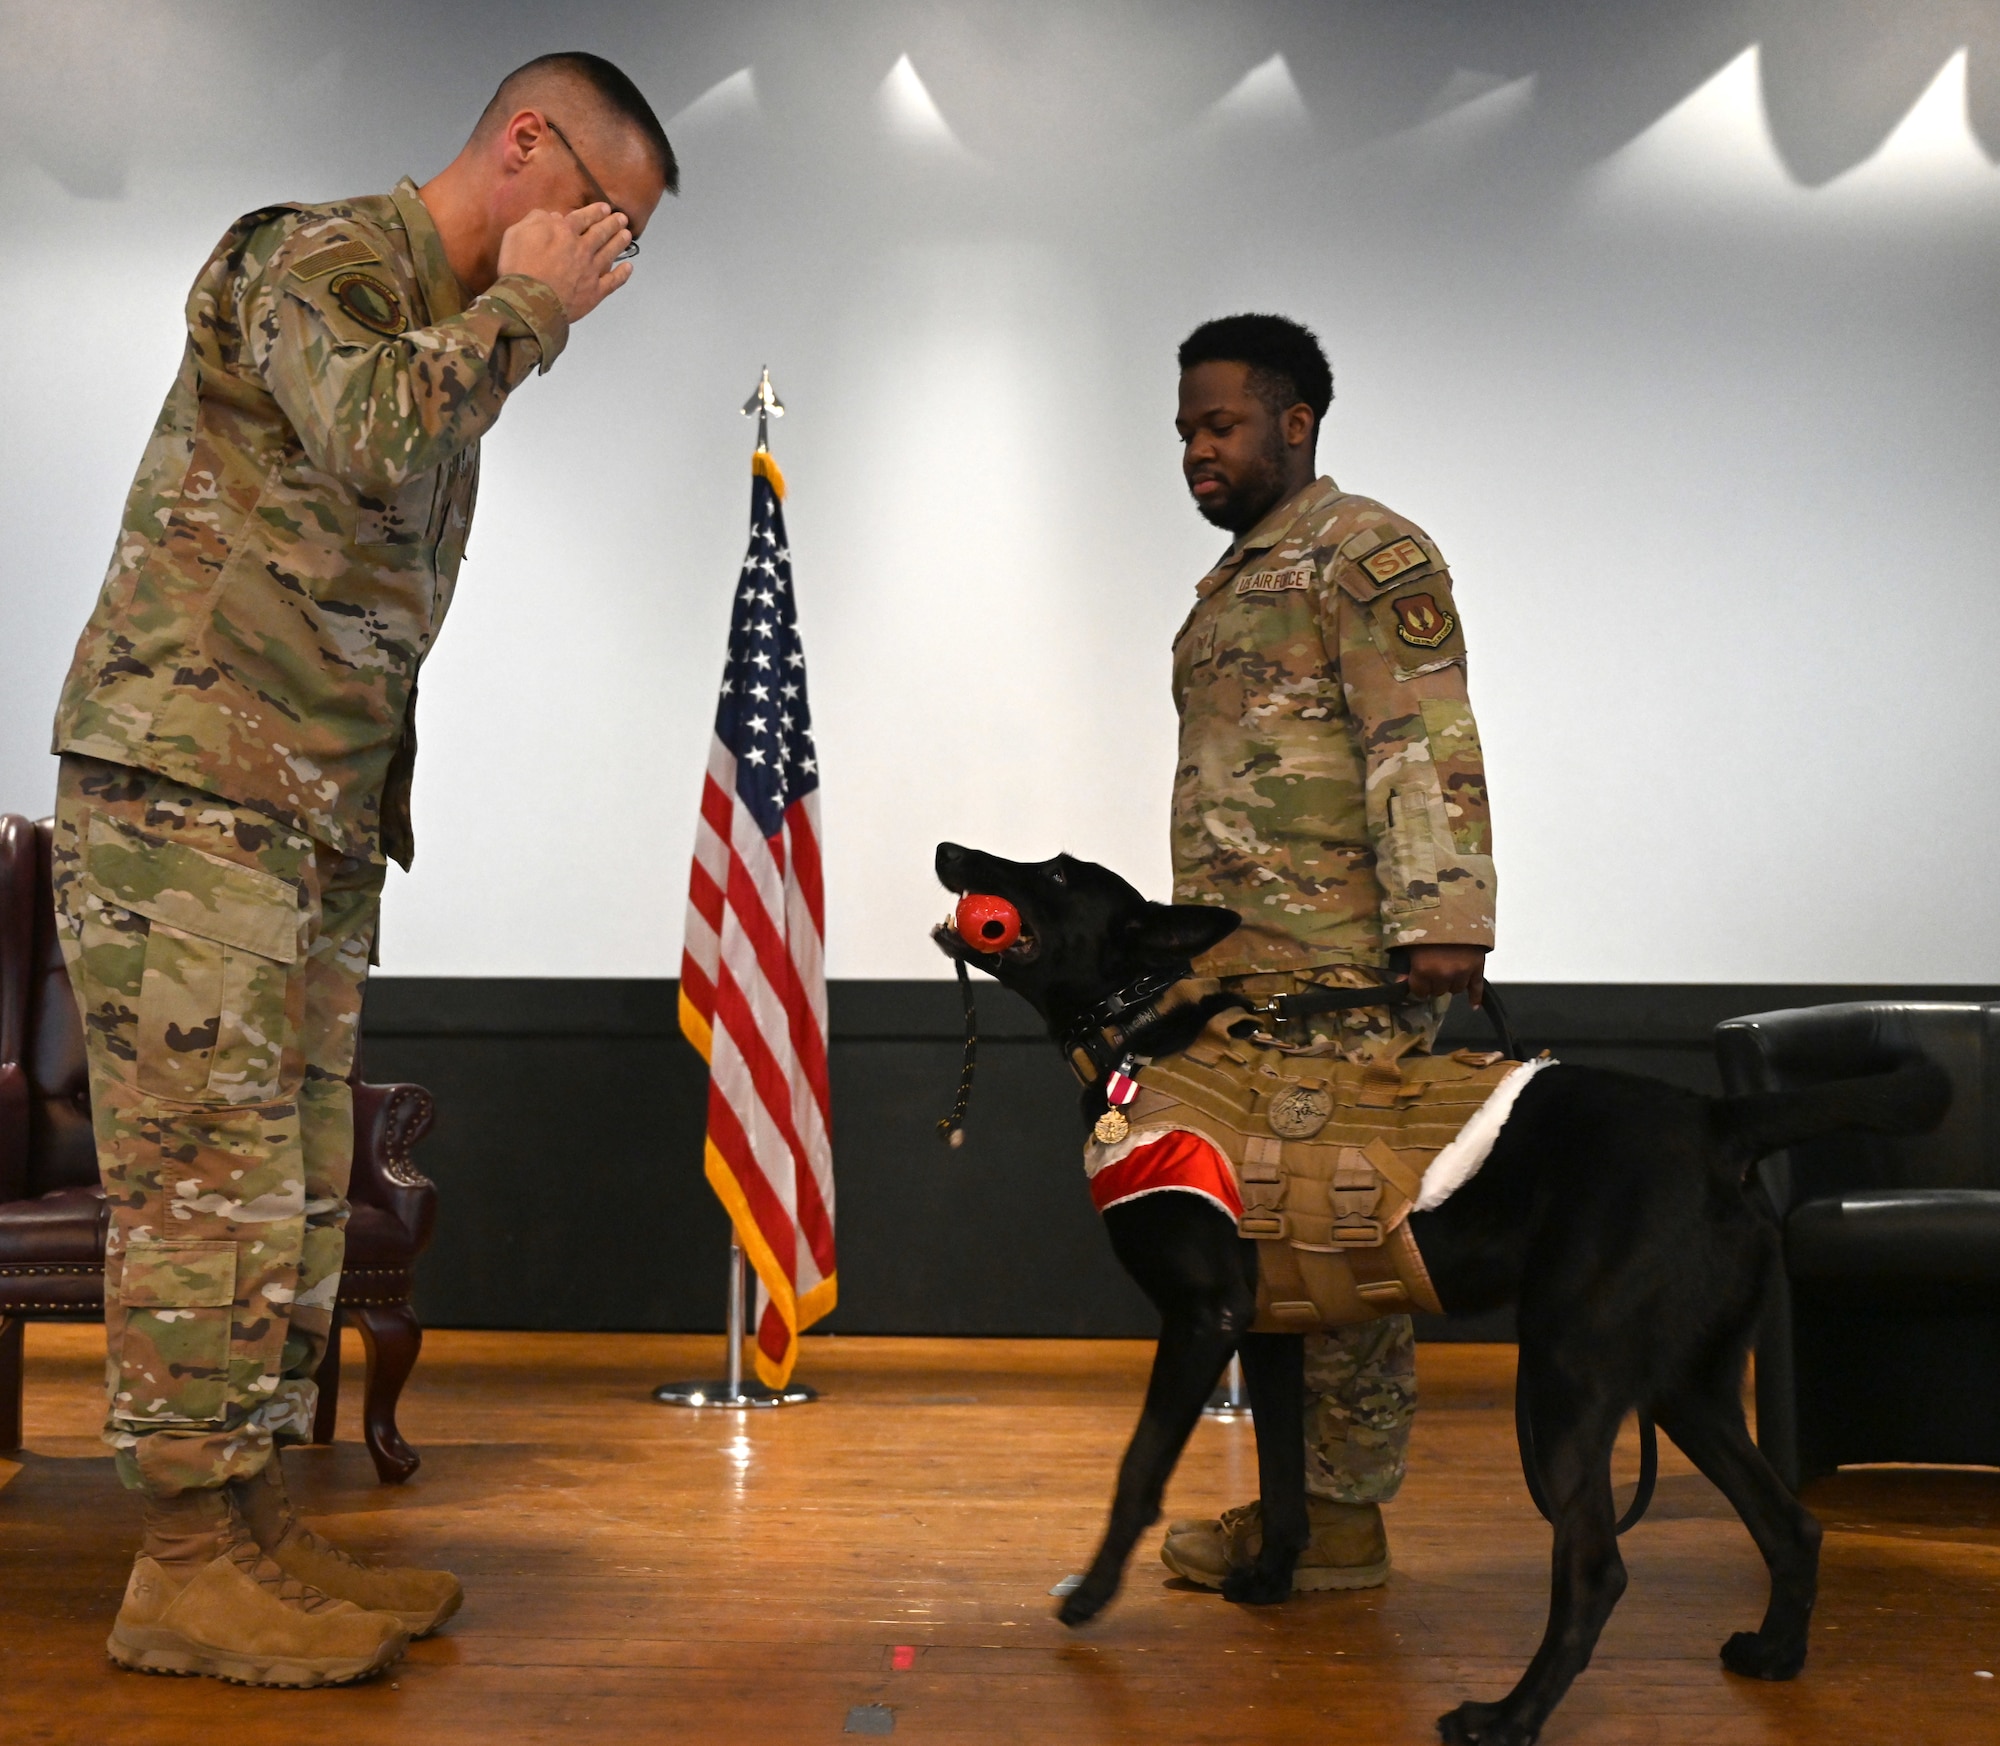 U.S. Air Force Lt. Col. Ben Washburn, left, 48th Security Forces Squadron commander, salutes Military Working Dog Cchuy after pinning on the K9’s Meritorious Service Medal at a retirement ceremony, held at Royal Air Force Lakenheath, England, Dec. 13, 2023. During his time at RAF Lakenheath, Cchuy amassed more than 5,900 in all-weather specialized explosive search, deterrence and intruder detection operations, to provide a safe and secure environment for the mission accomplishment of the 48th Fighter Wing. The newly retired MWD has been adopted by his final handler, Staff Sgt. Ben Kaupp (not pictured) and his family. (U.S. Air Force photo by Karen Abeyasekere)